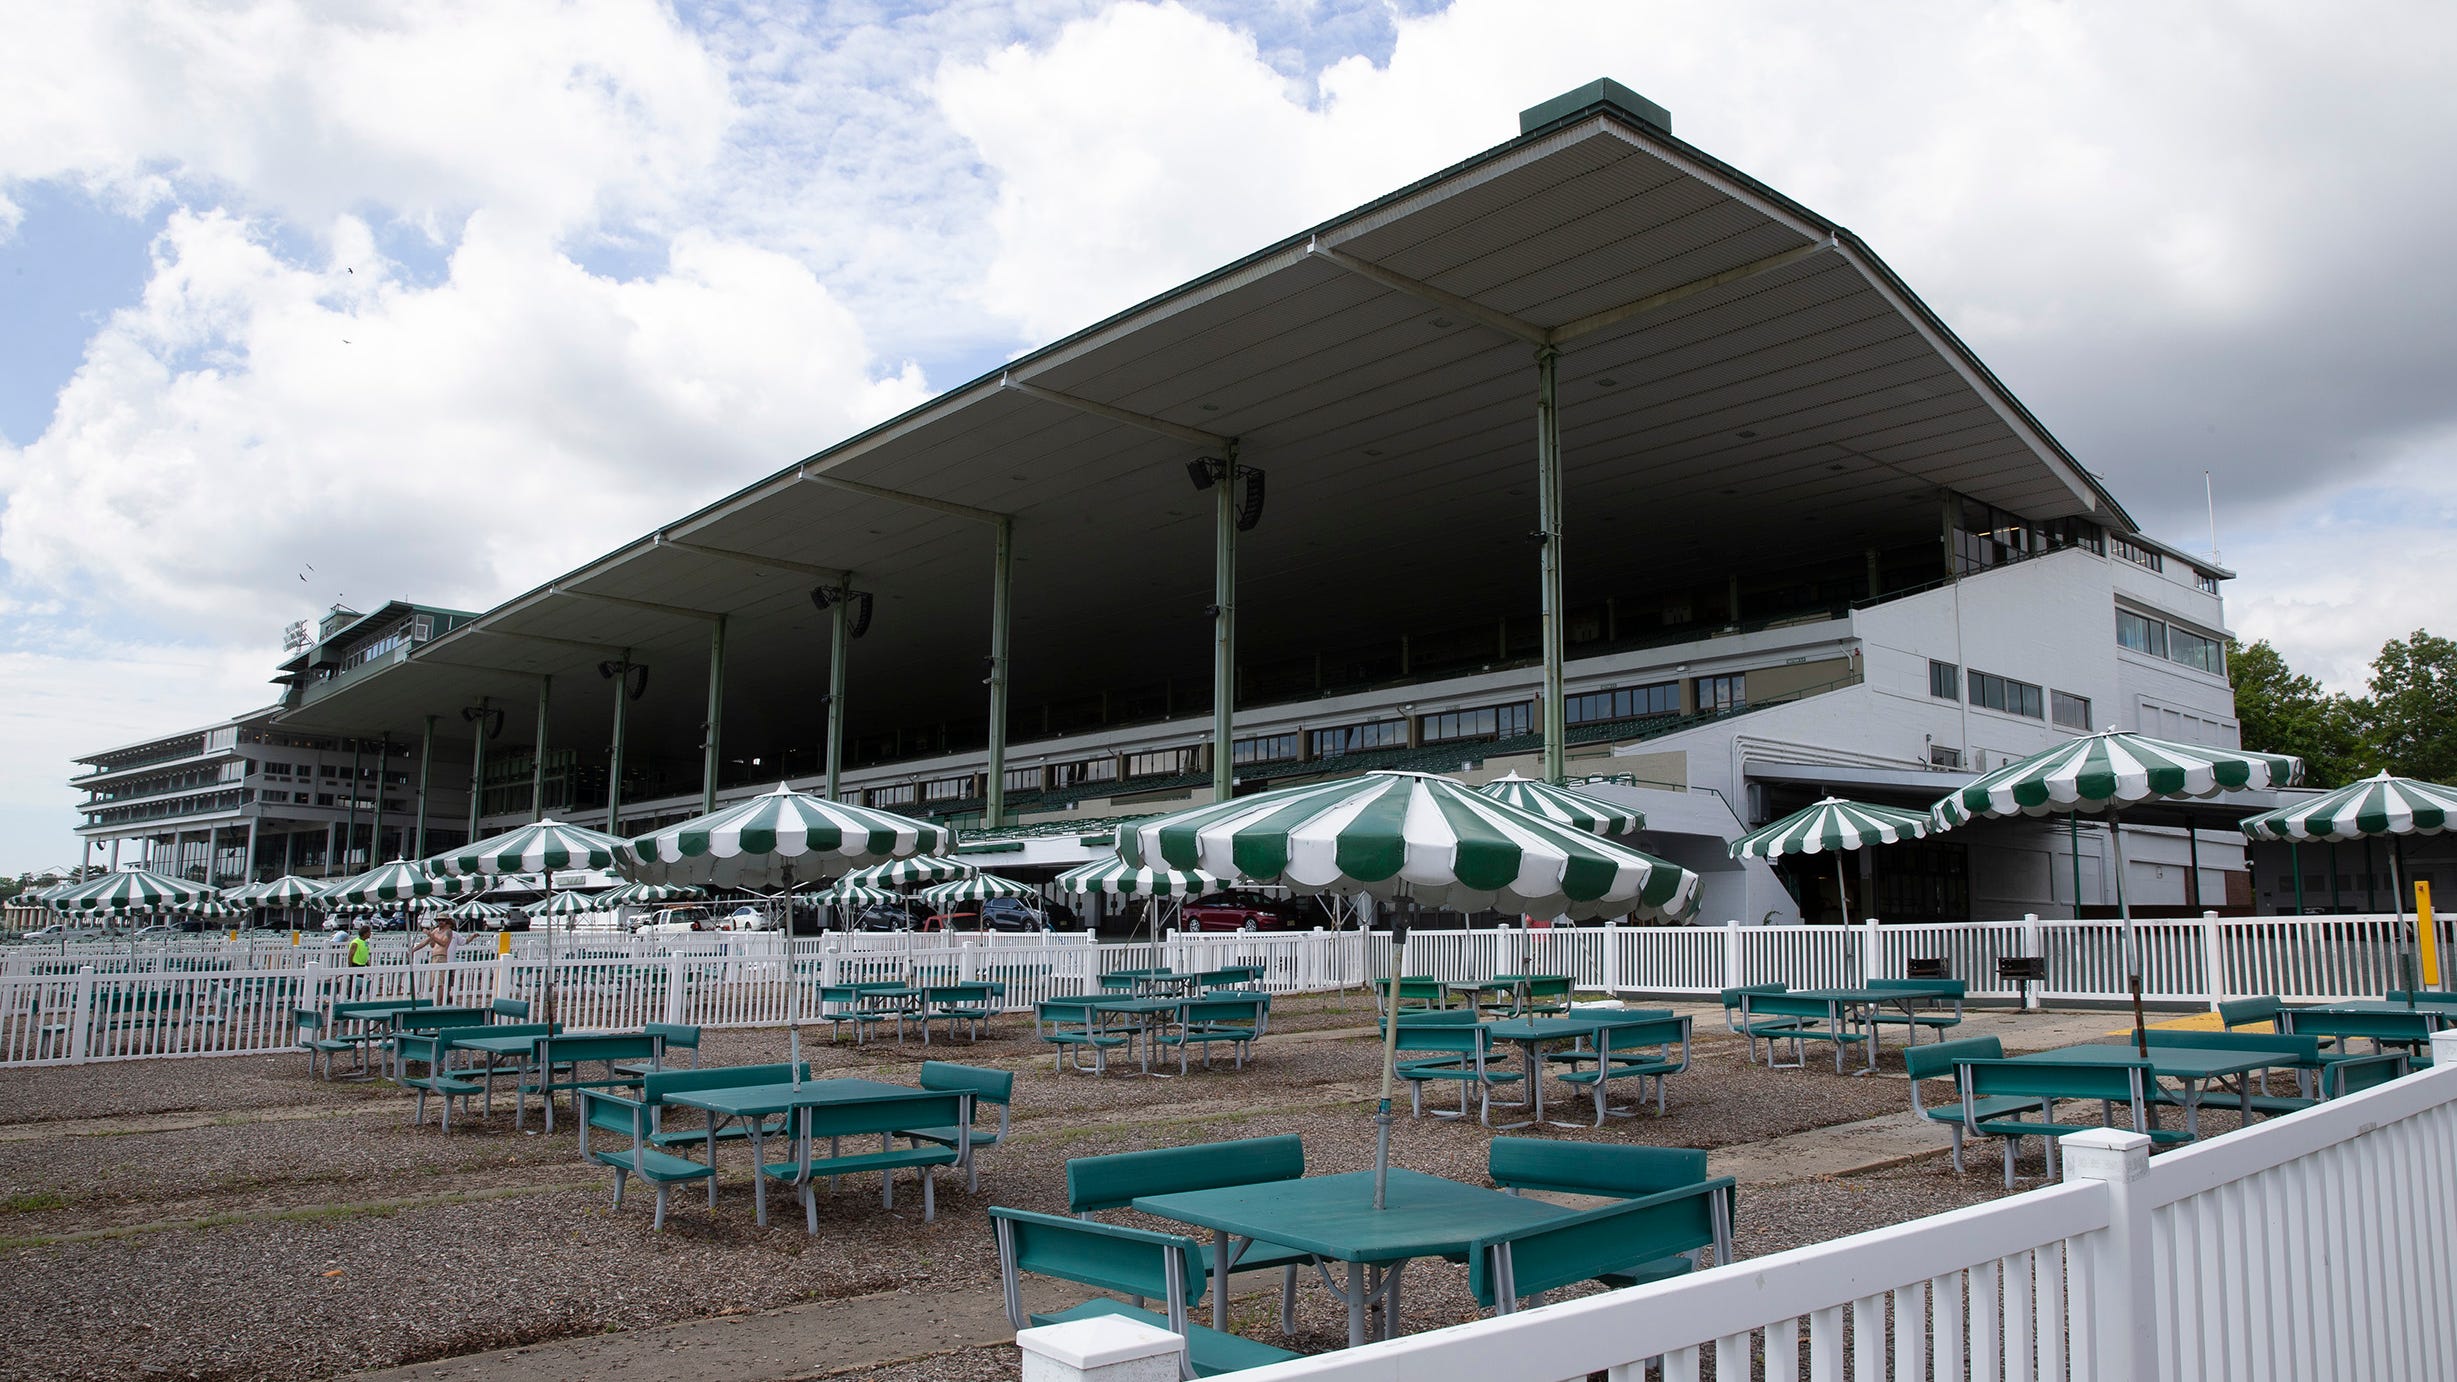 Monmouth Park: NJ orders spectators capped at 2,000, even though capacity is 60,000